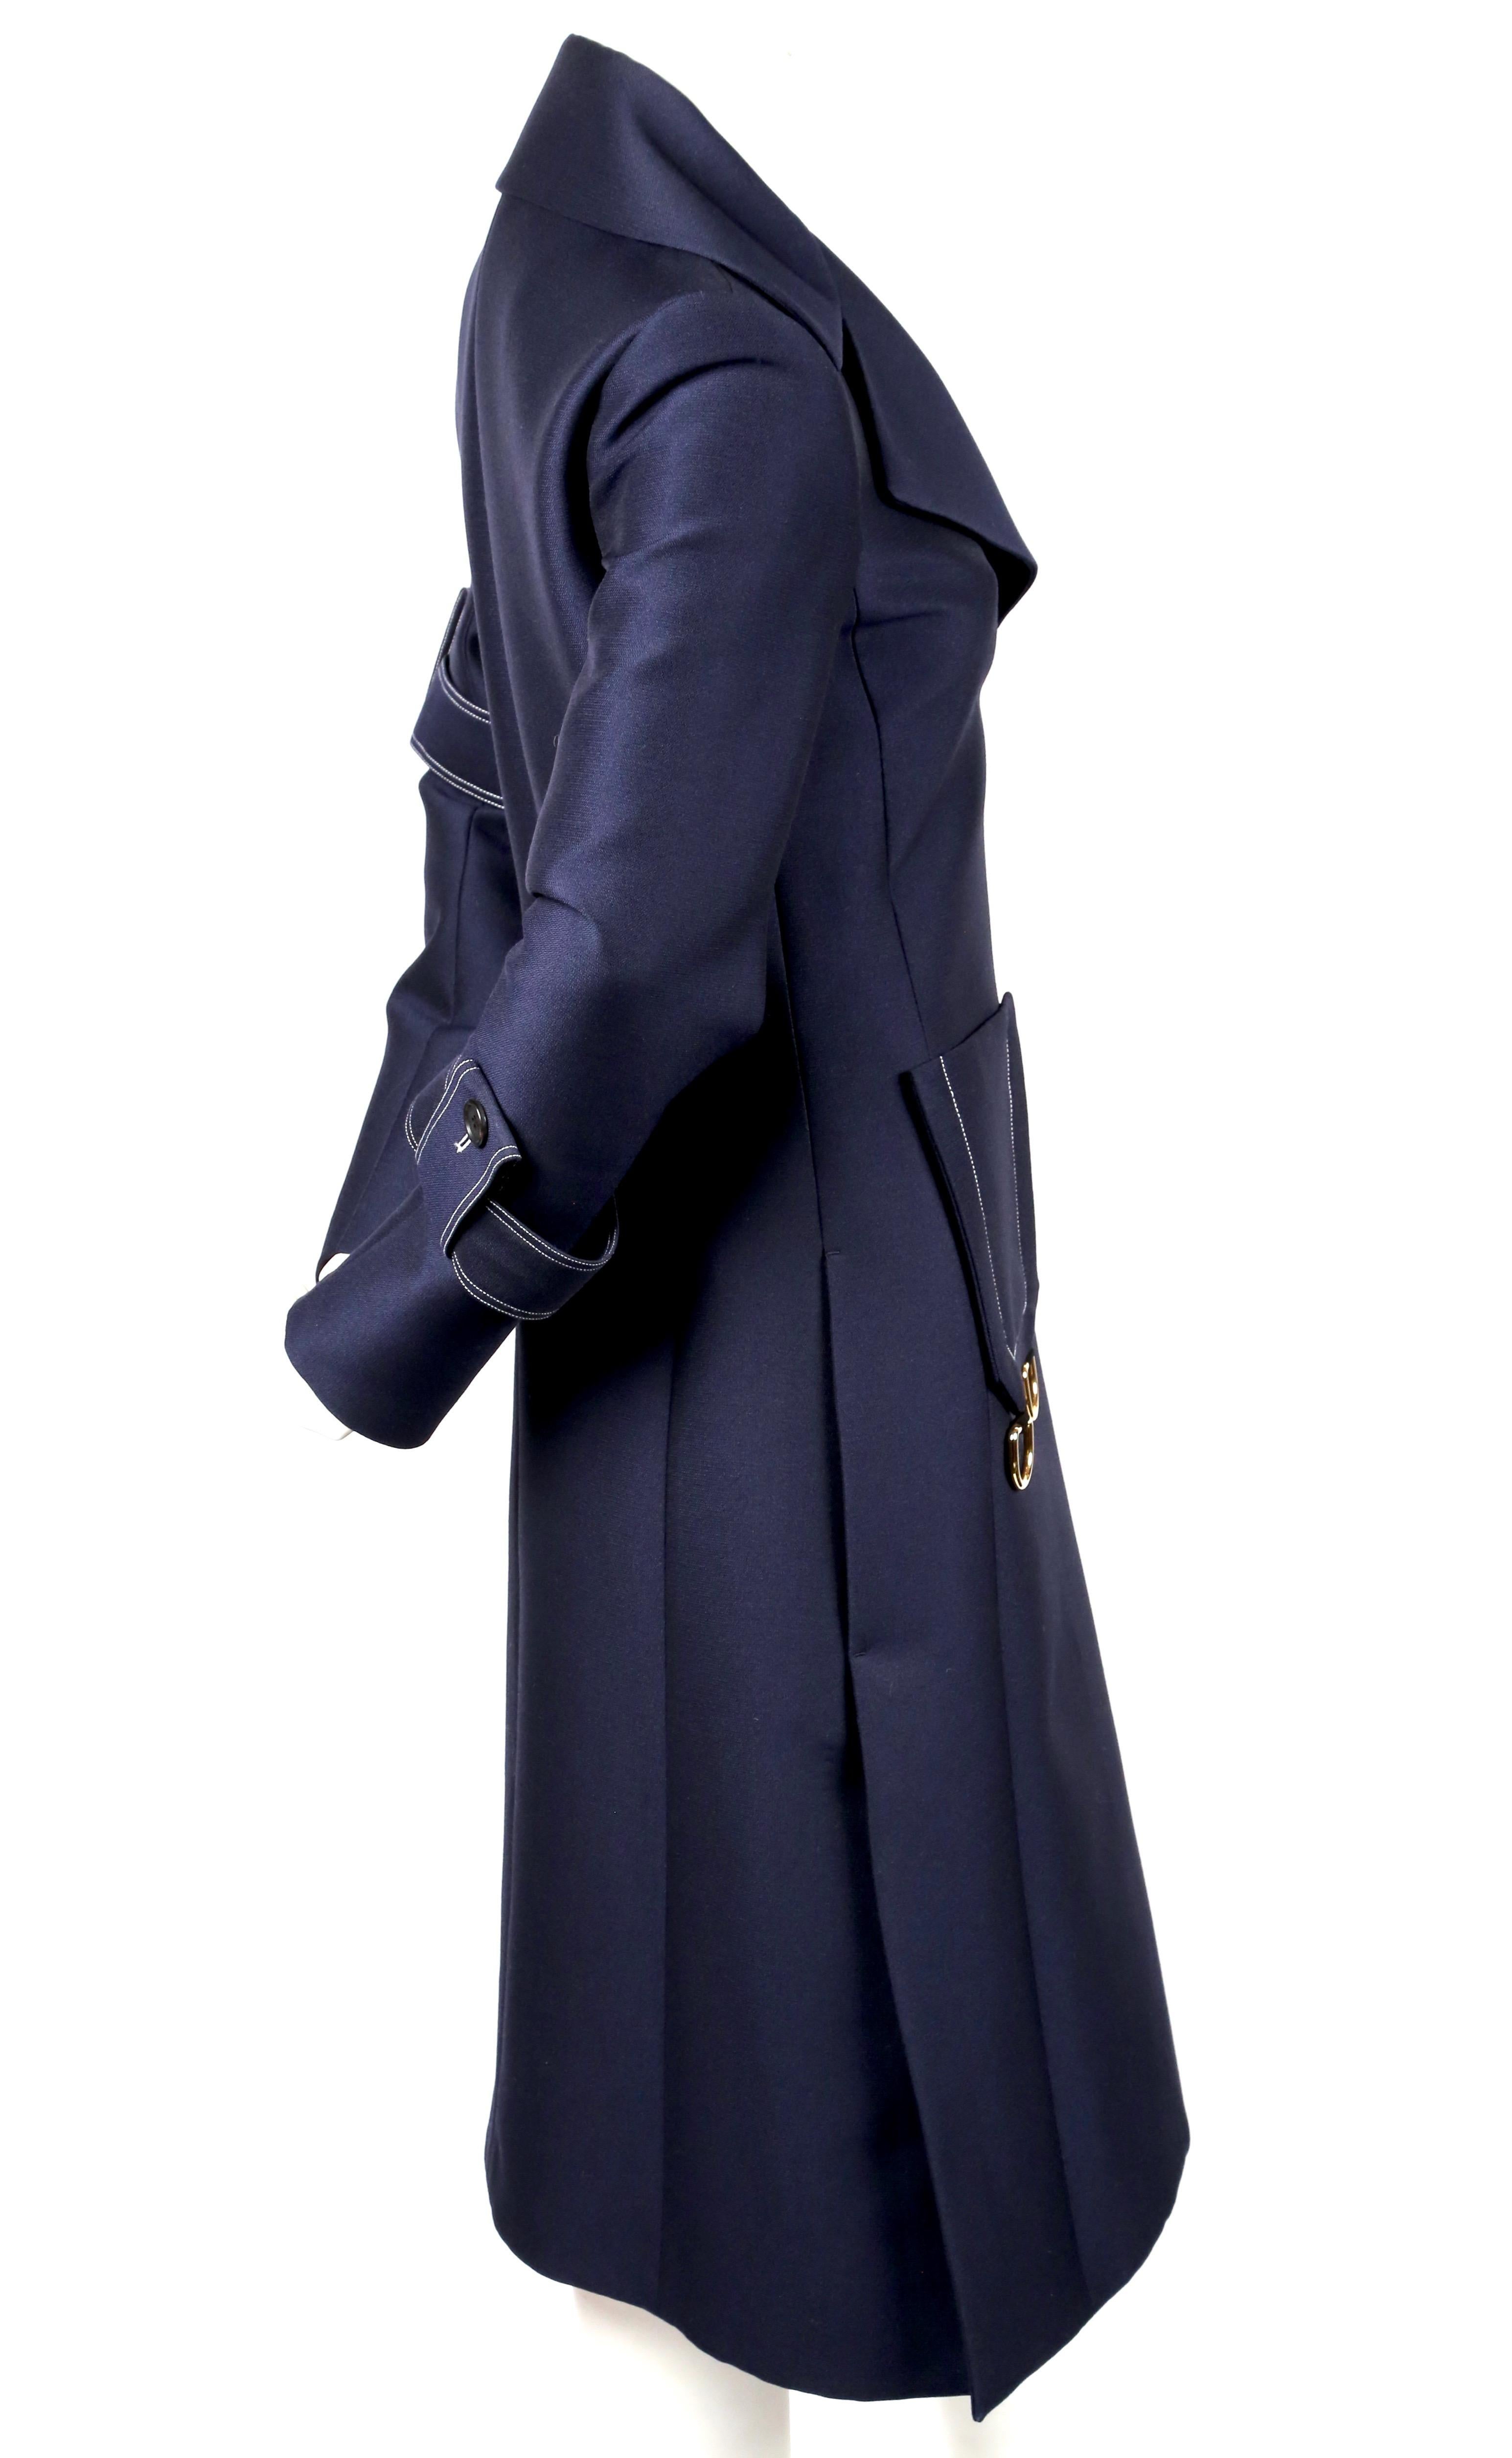 Navy blue, tailored coat with white top-stitching and gold hardware designed by Phoebe Philo for Celine exactly as seen on the spring 2015 runway.  French size 38. Runs small through the bust. Approximate measurements: shoulder 16